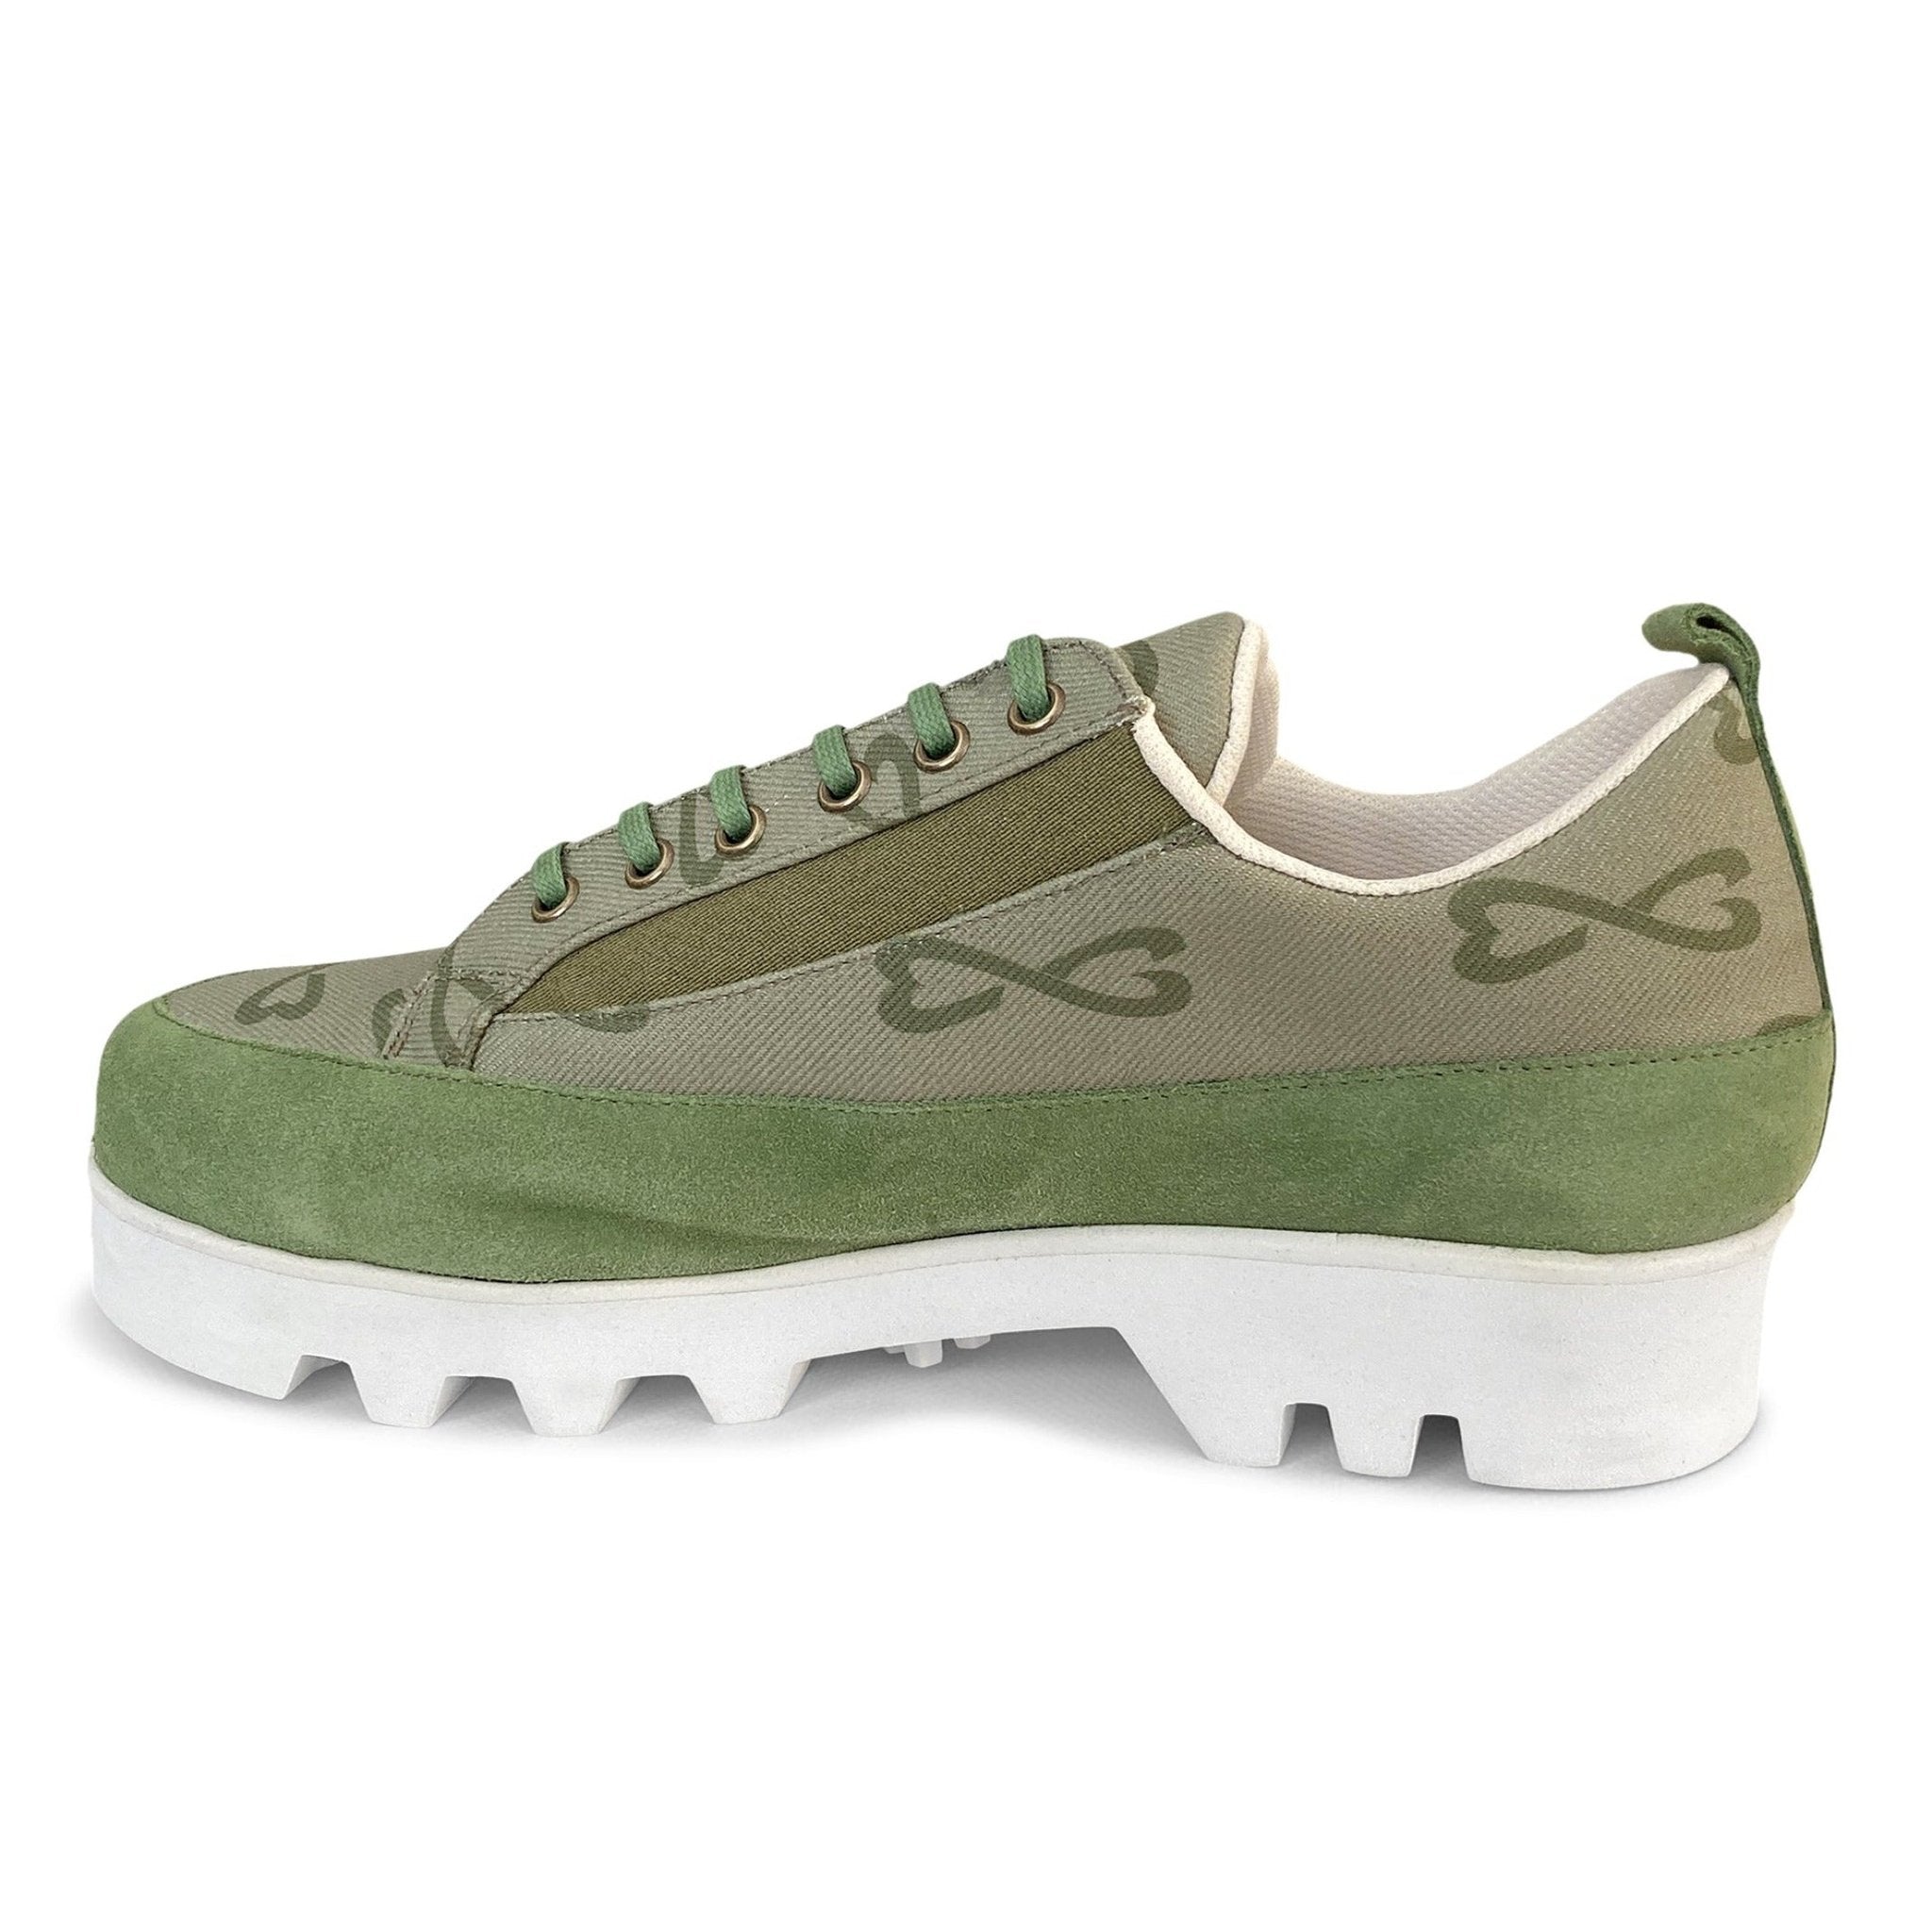 green canvas suede sneaker large sizes